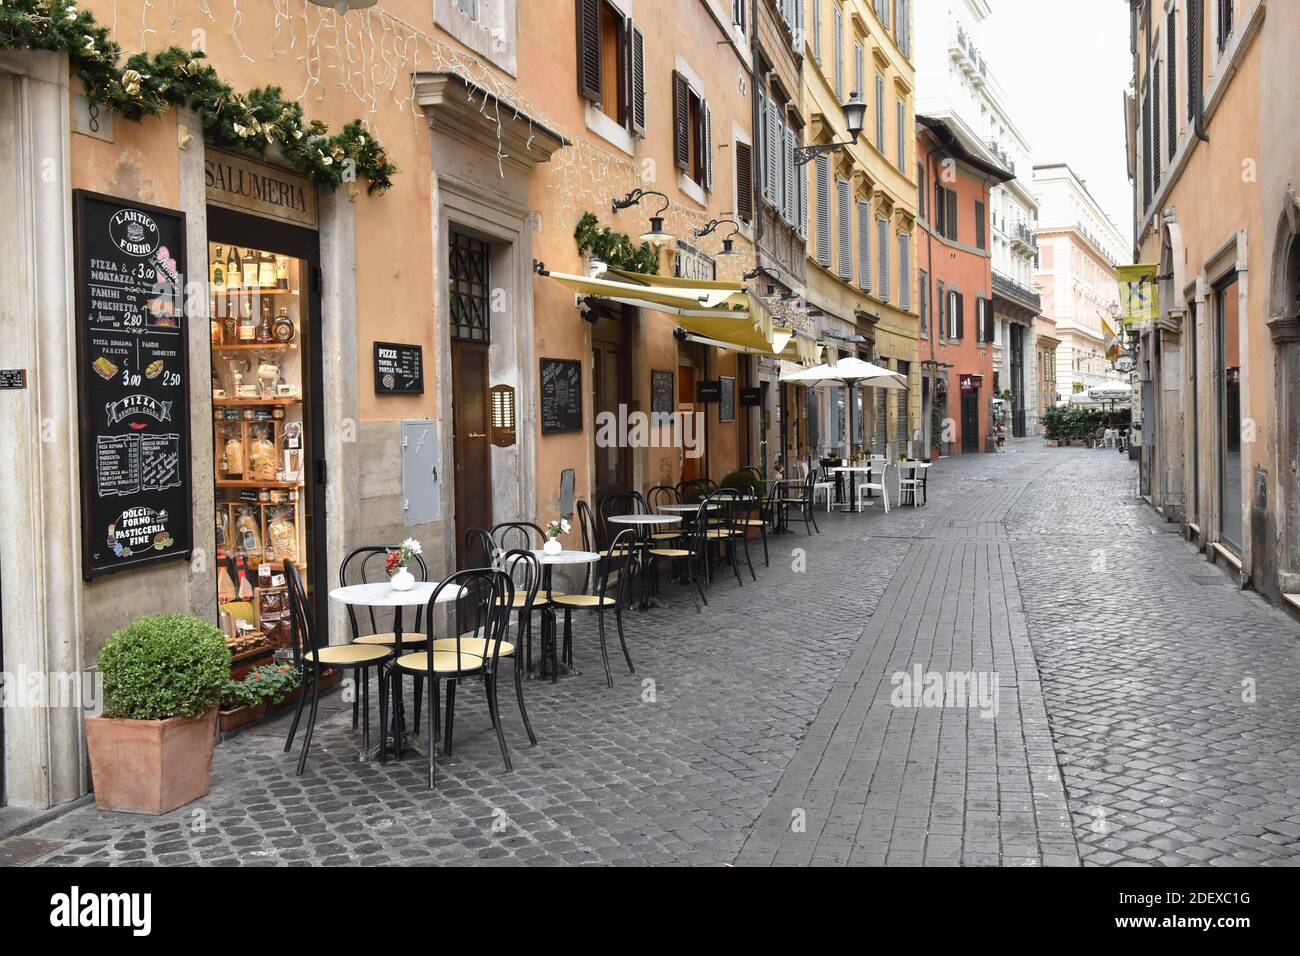 AN EMPTY STREET IN THE HISTORIC CENTER DUE TO LACK OF PEOPLE AND TOURISTS DUE TO THE COVID 19 PANDEMIC Stock Photo